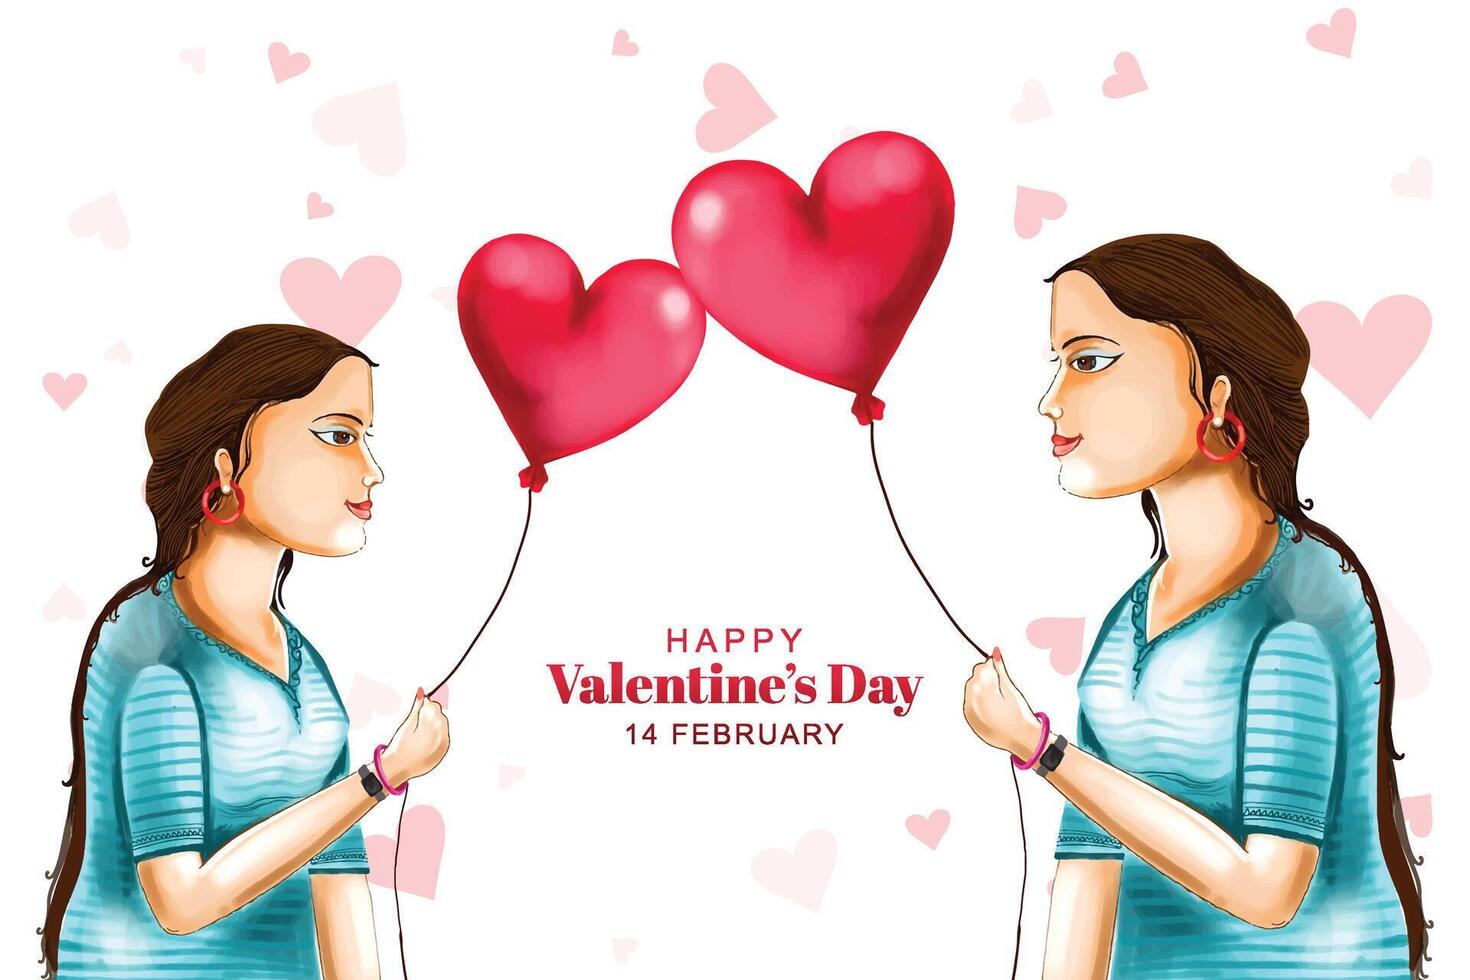 Beautiful cute girl for harts valentines day card background vector